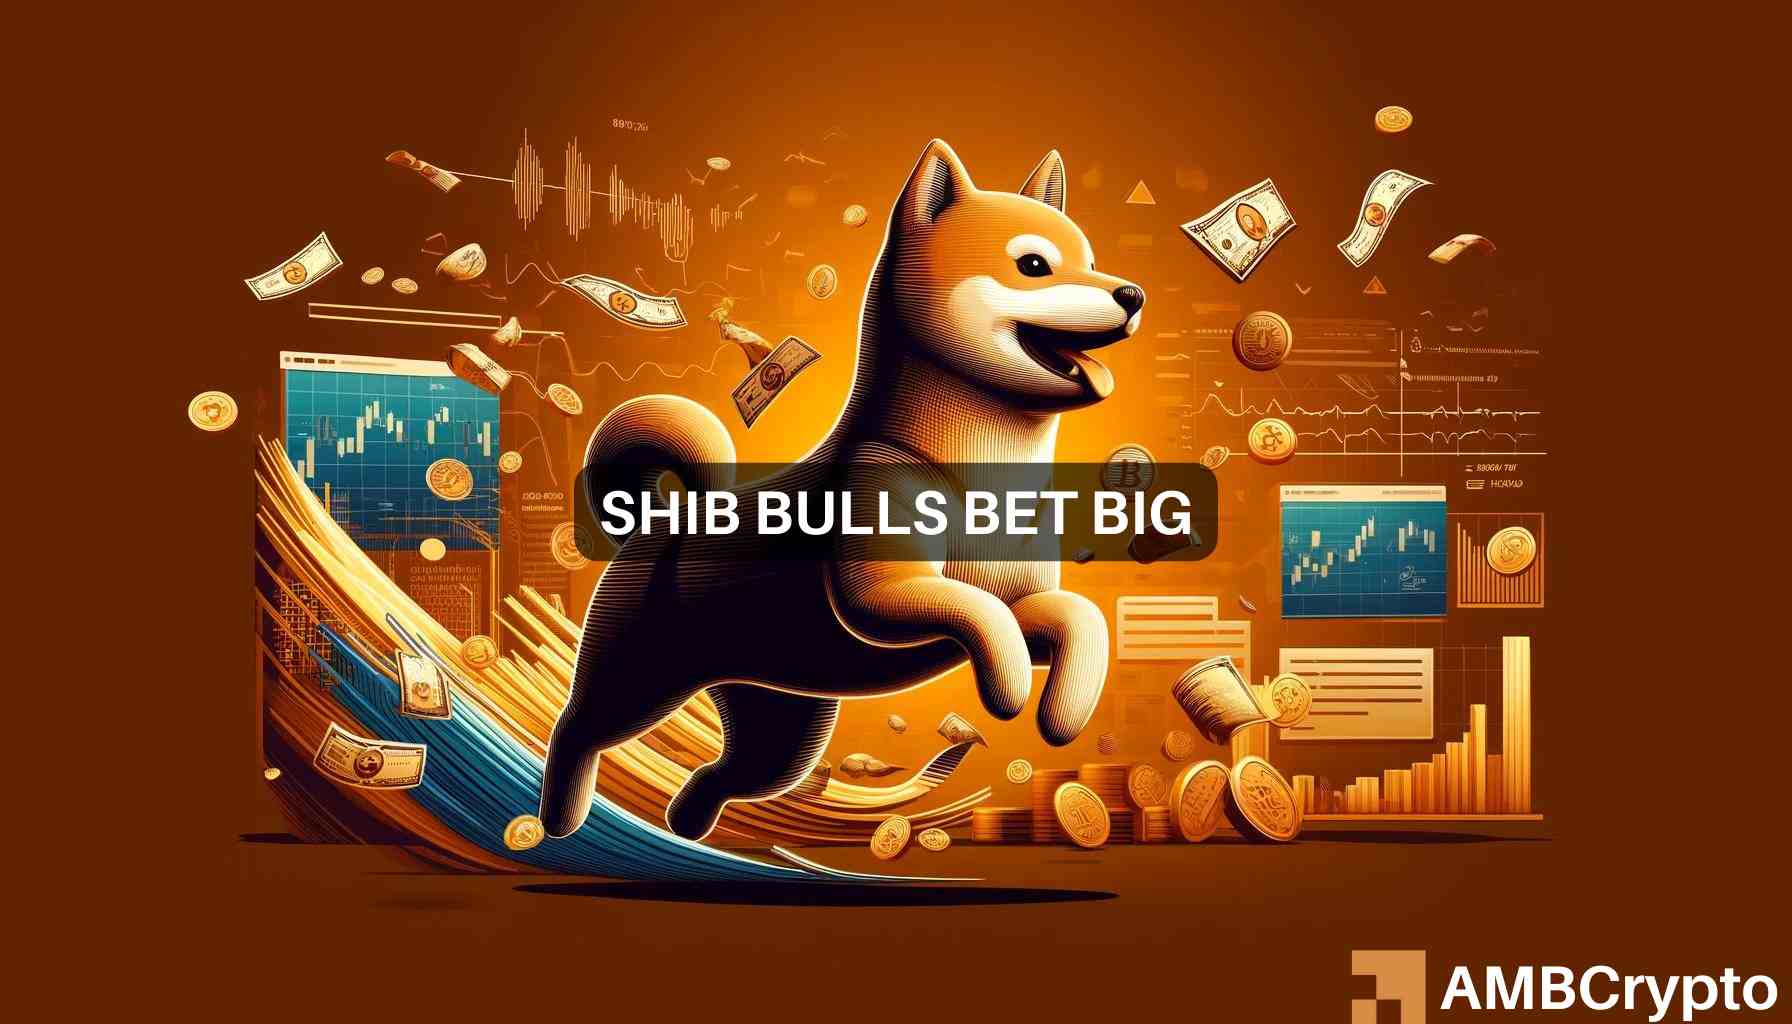 Shiba Inu: THIS indicates price rise - What moves should you make?